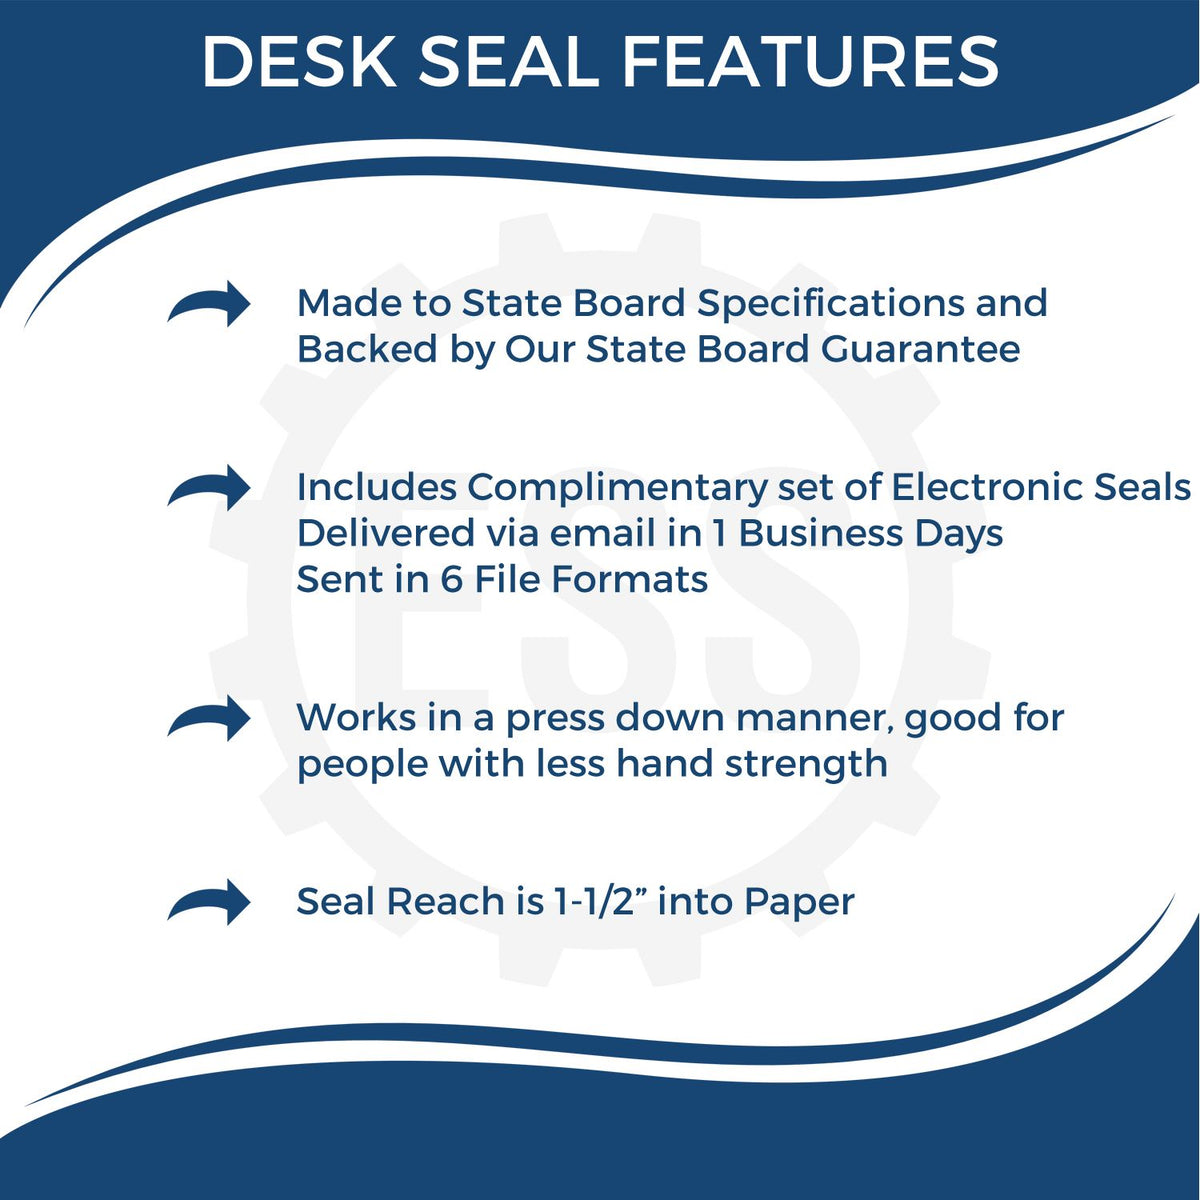 A picture of an infographic highlighting the selling points for the Wyoming Desk Architect Embossing Seal